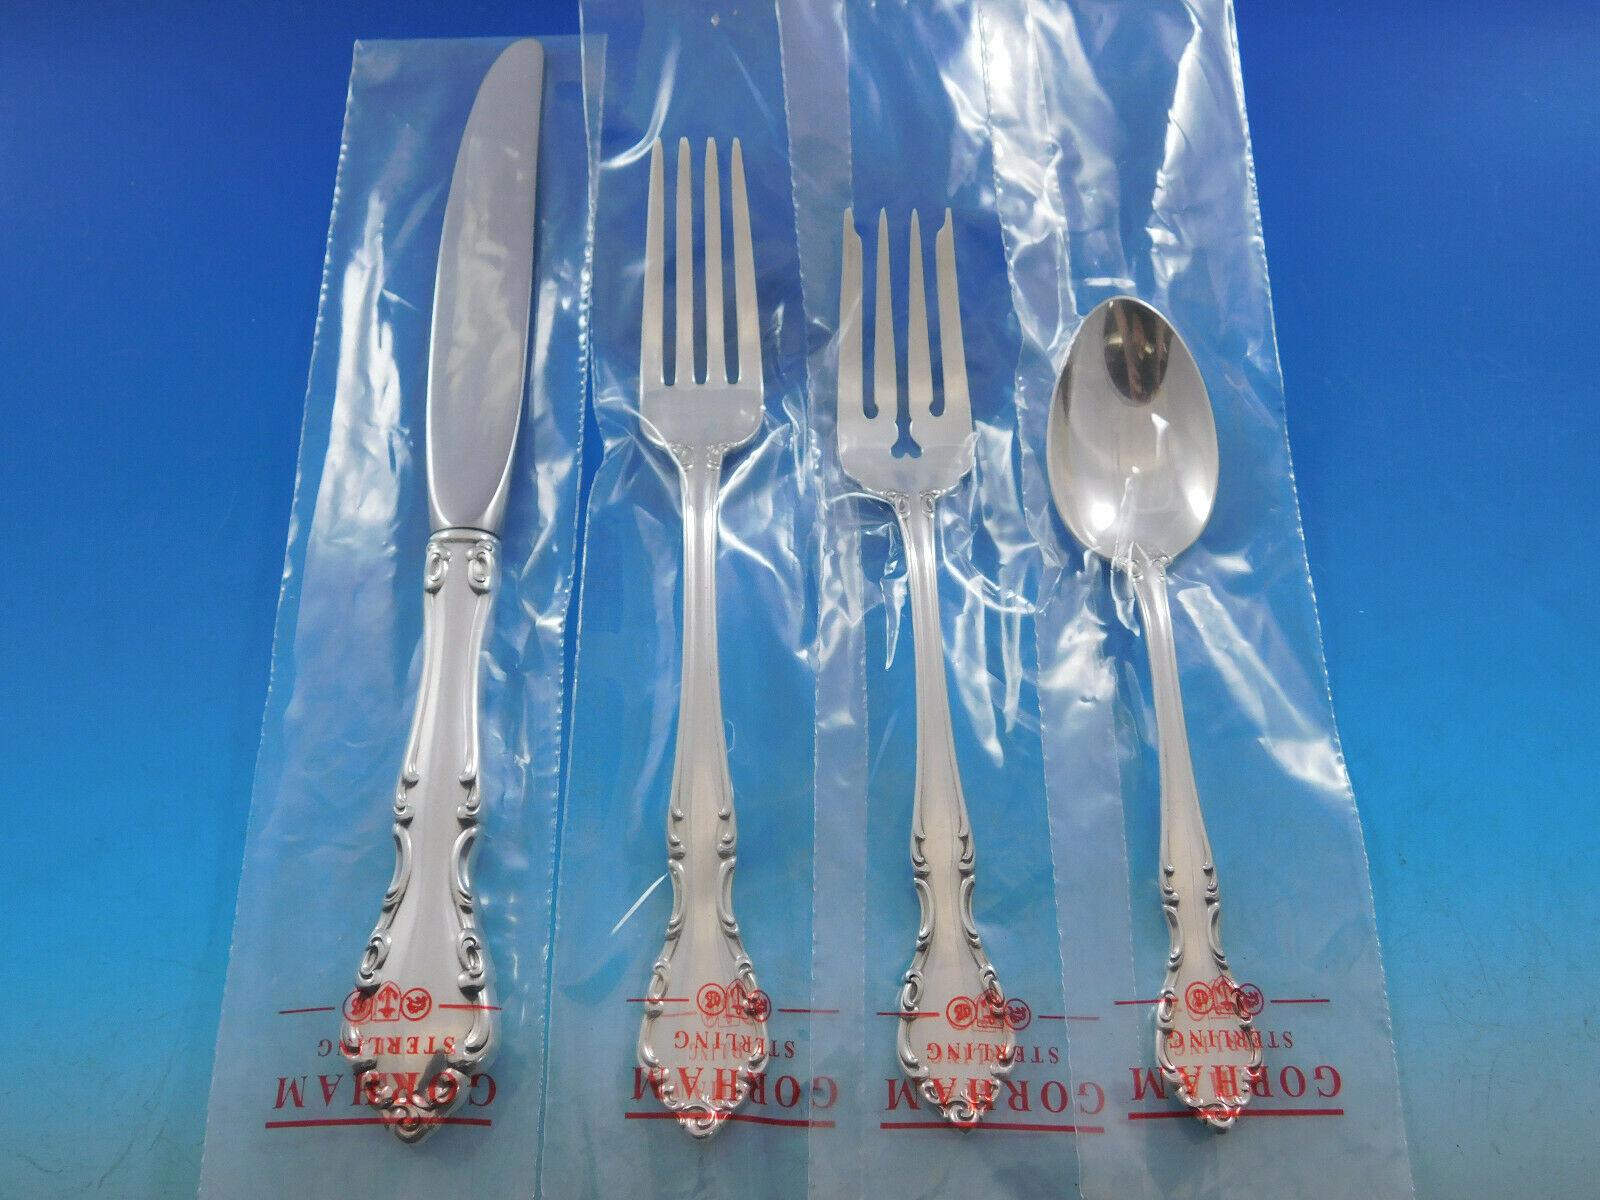 Unused Chelsea Manor by Gorham sterling silver flatware set, 43 pieces. This set includes:

8 knives, 9 1/8